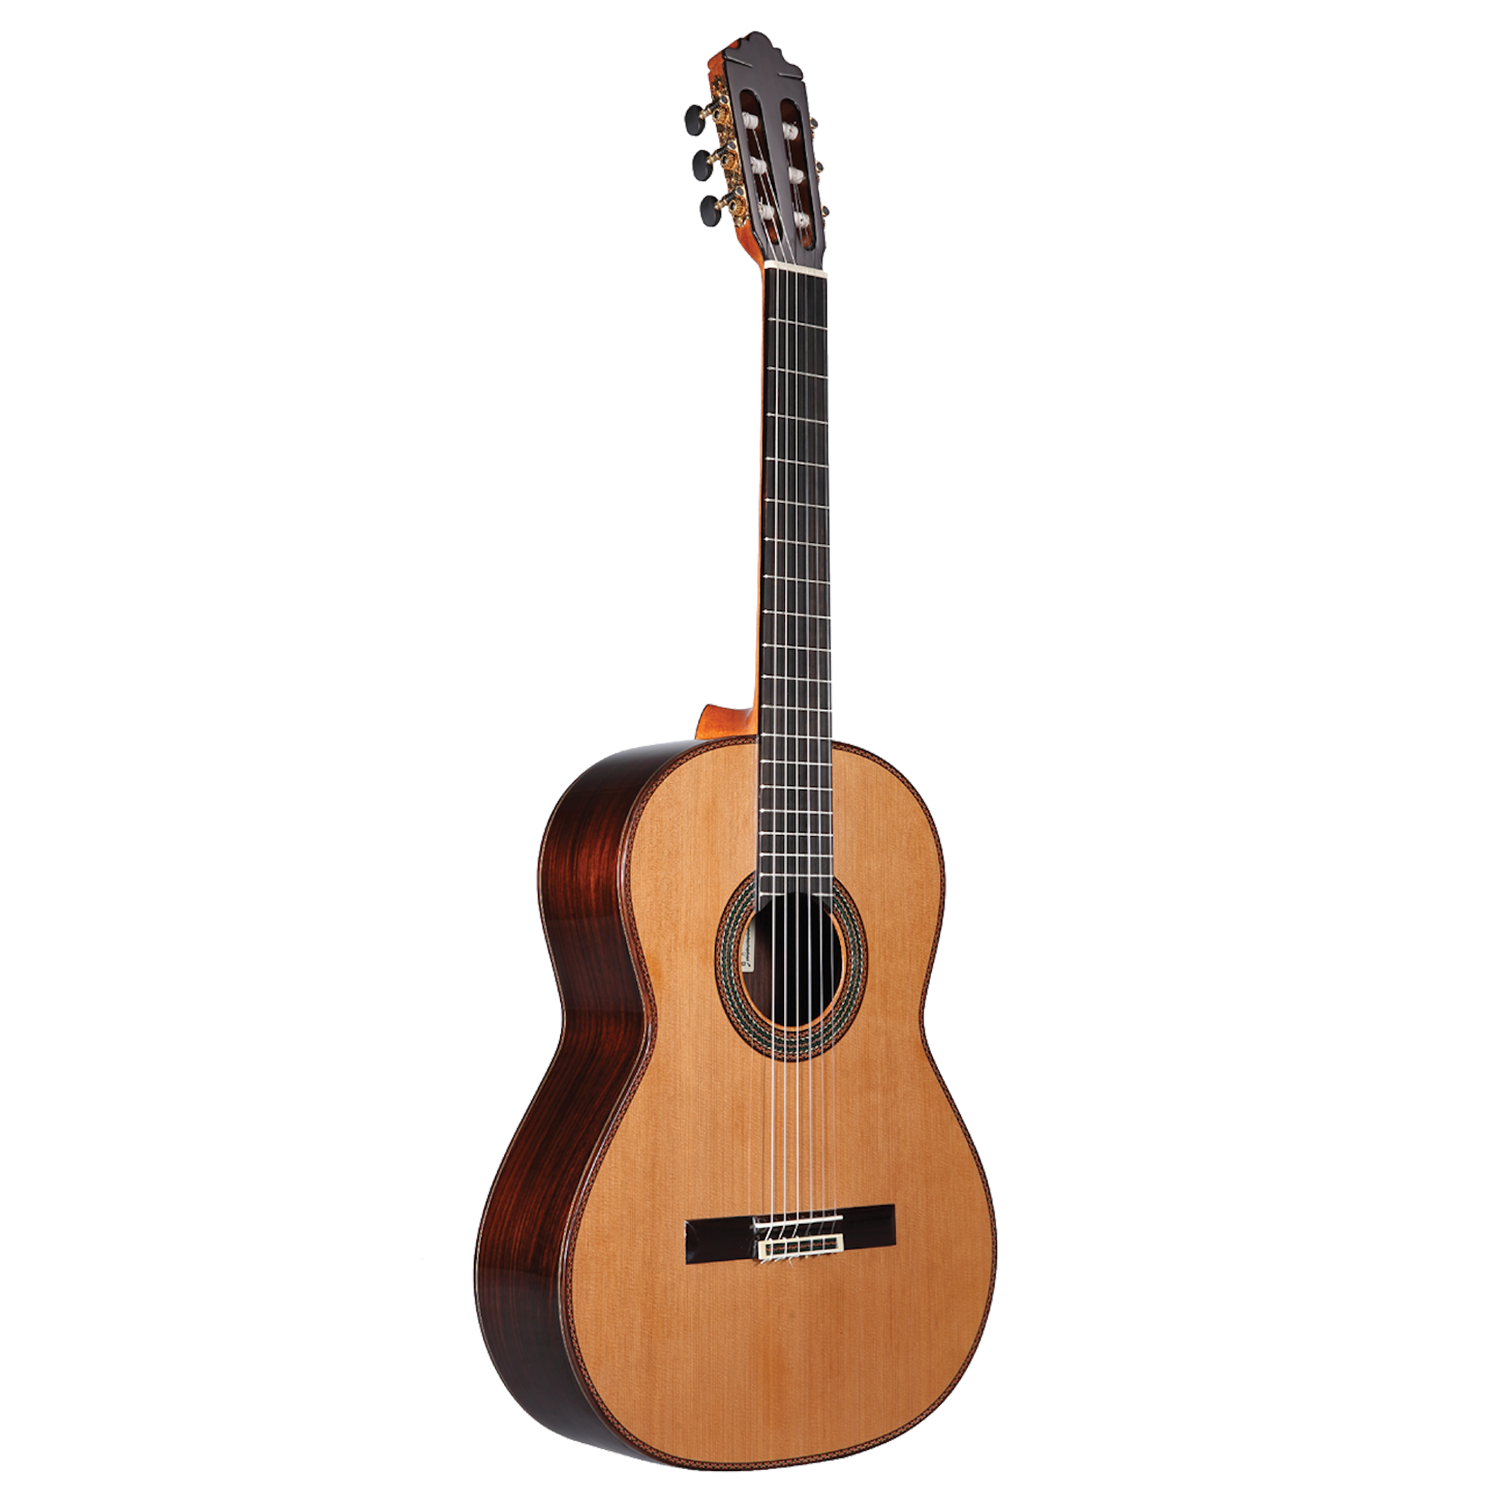 Altamira N600 Classical Guitar Solid Cedar Top/Solid Indian Rosewood Back & Sides w/Soft Case